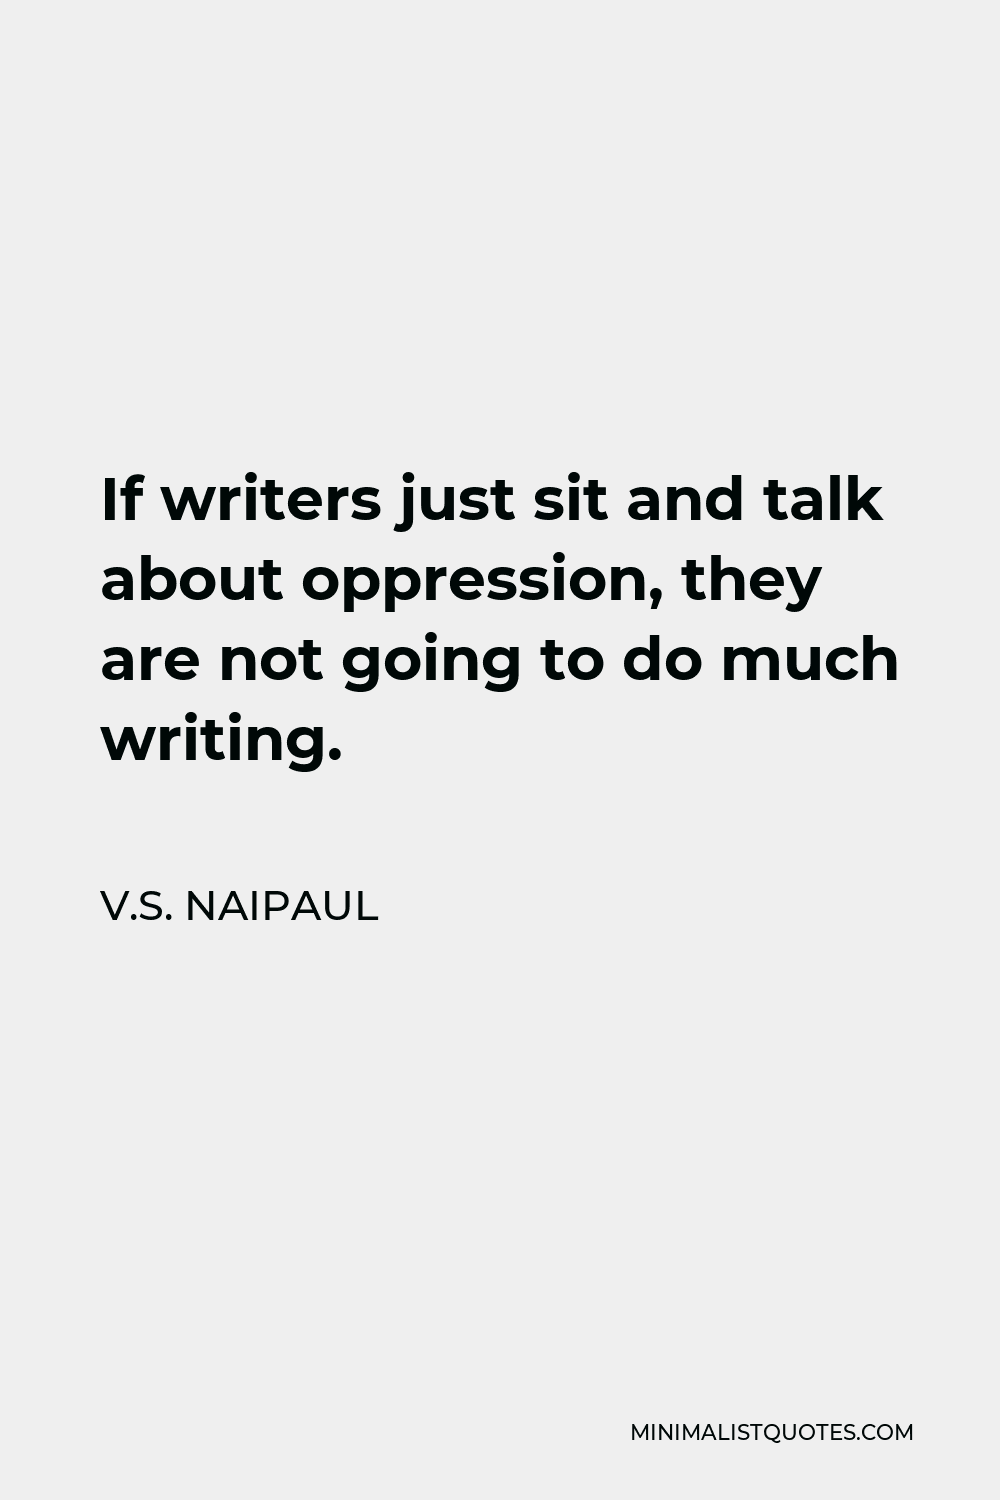 V.S. Naipaul Quote - If writers just sit and talk about oppression, they are not going to do much writing.